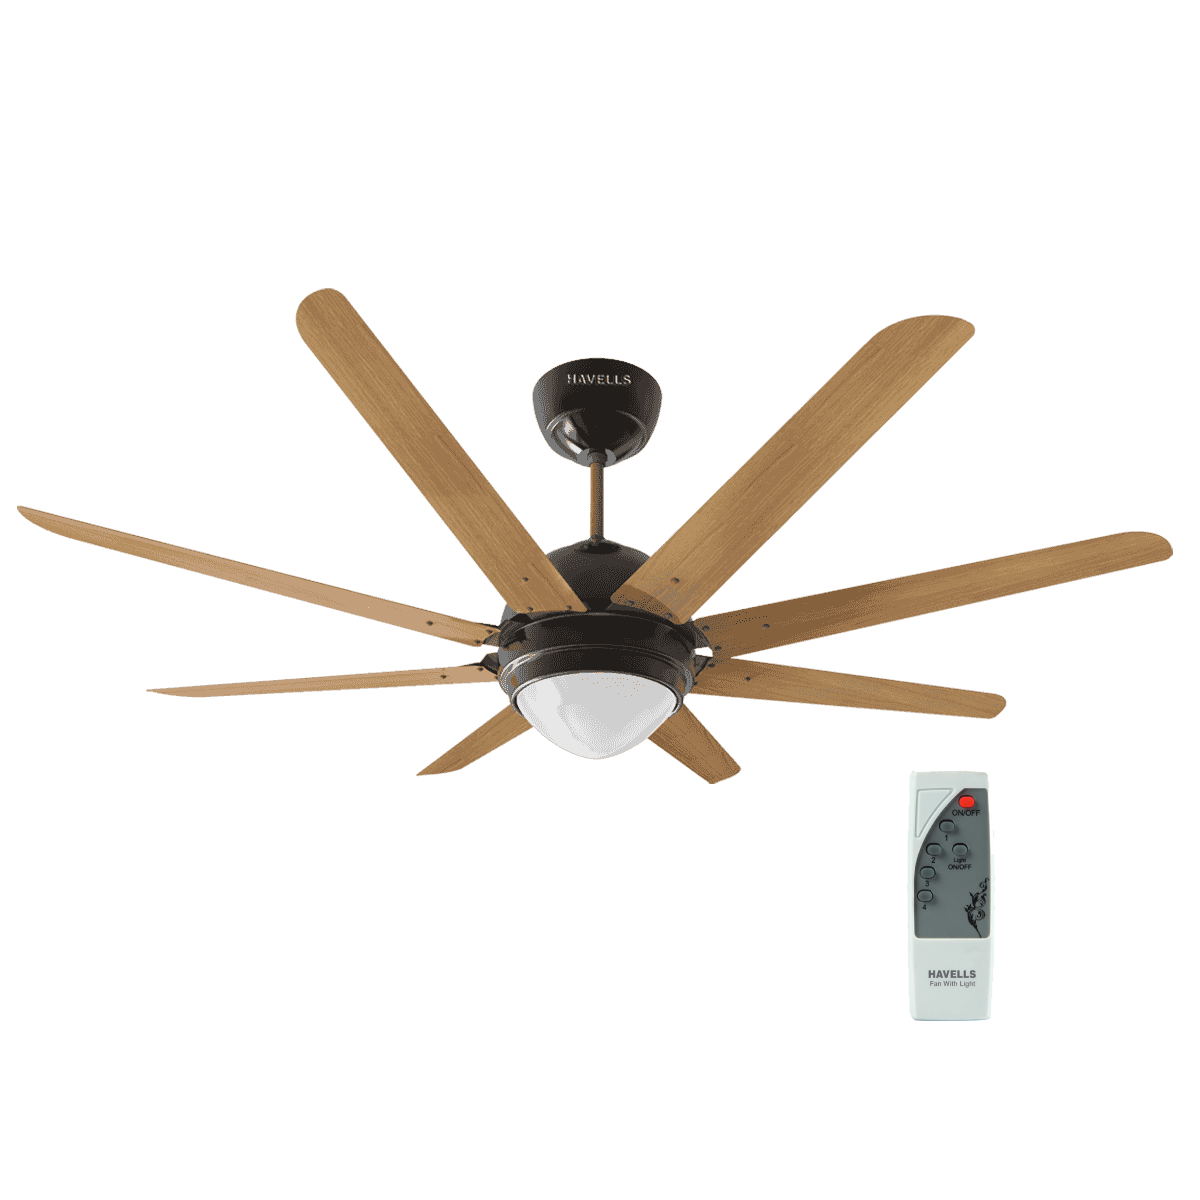 Havells 8 Blade Ceiling Fan 1320mm with Under Light OCTET UL